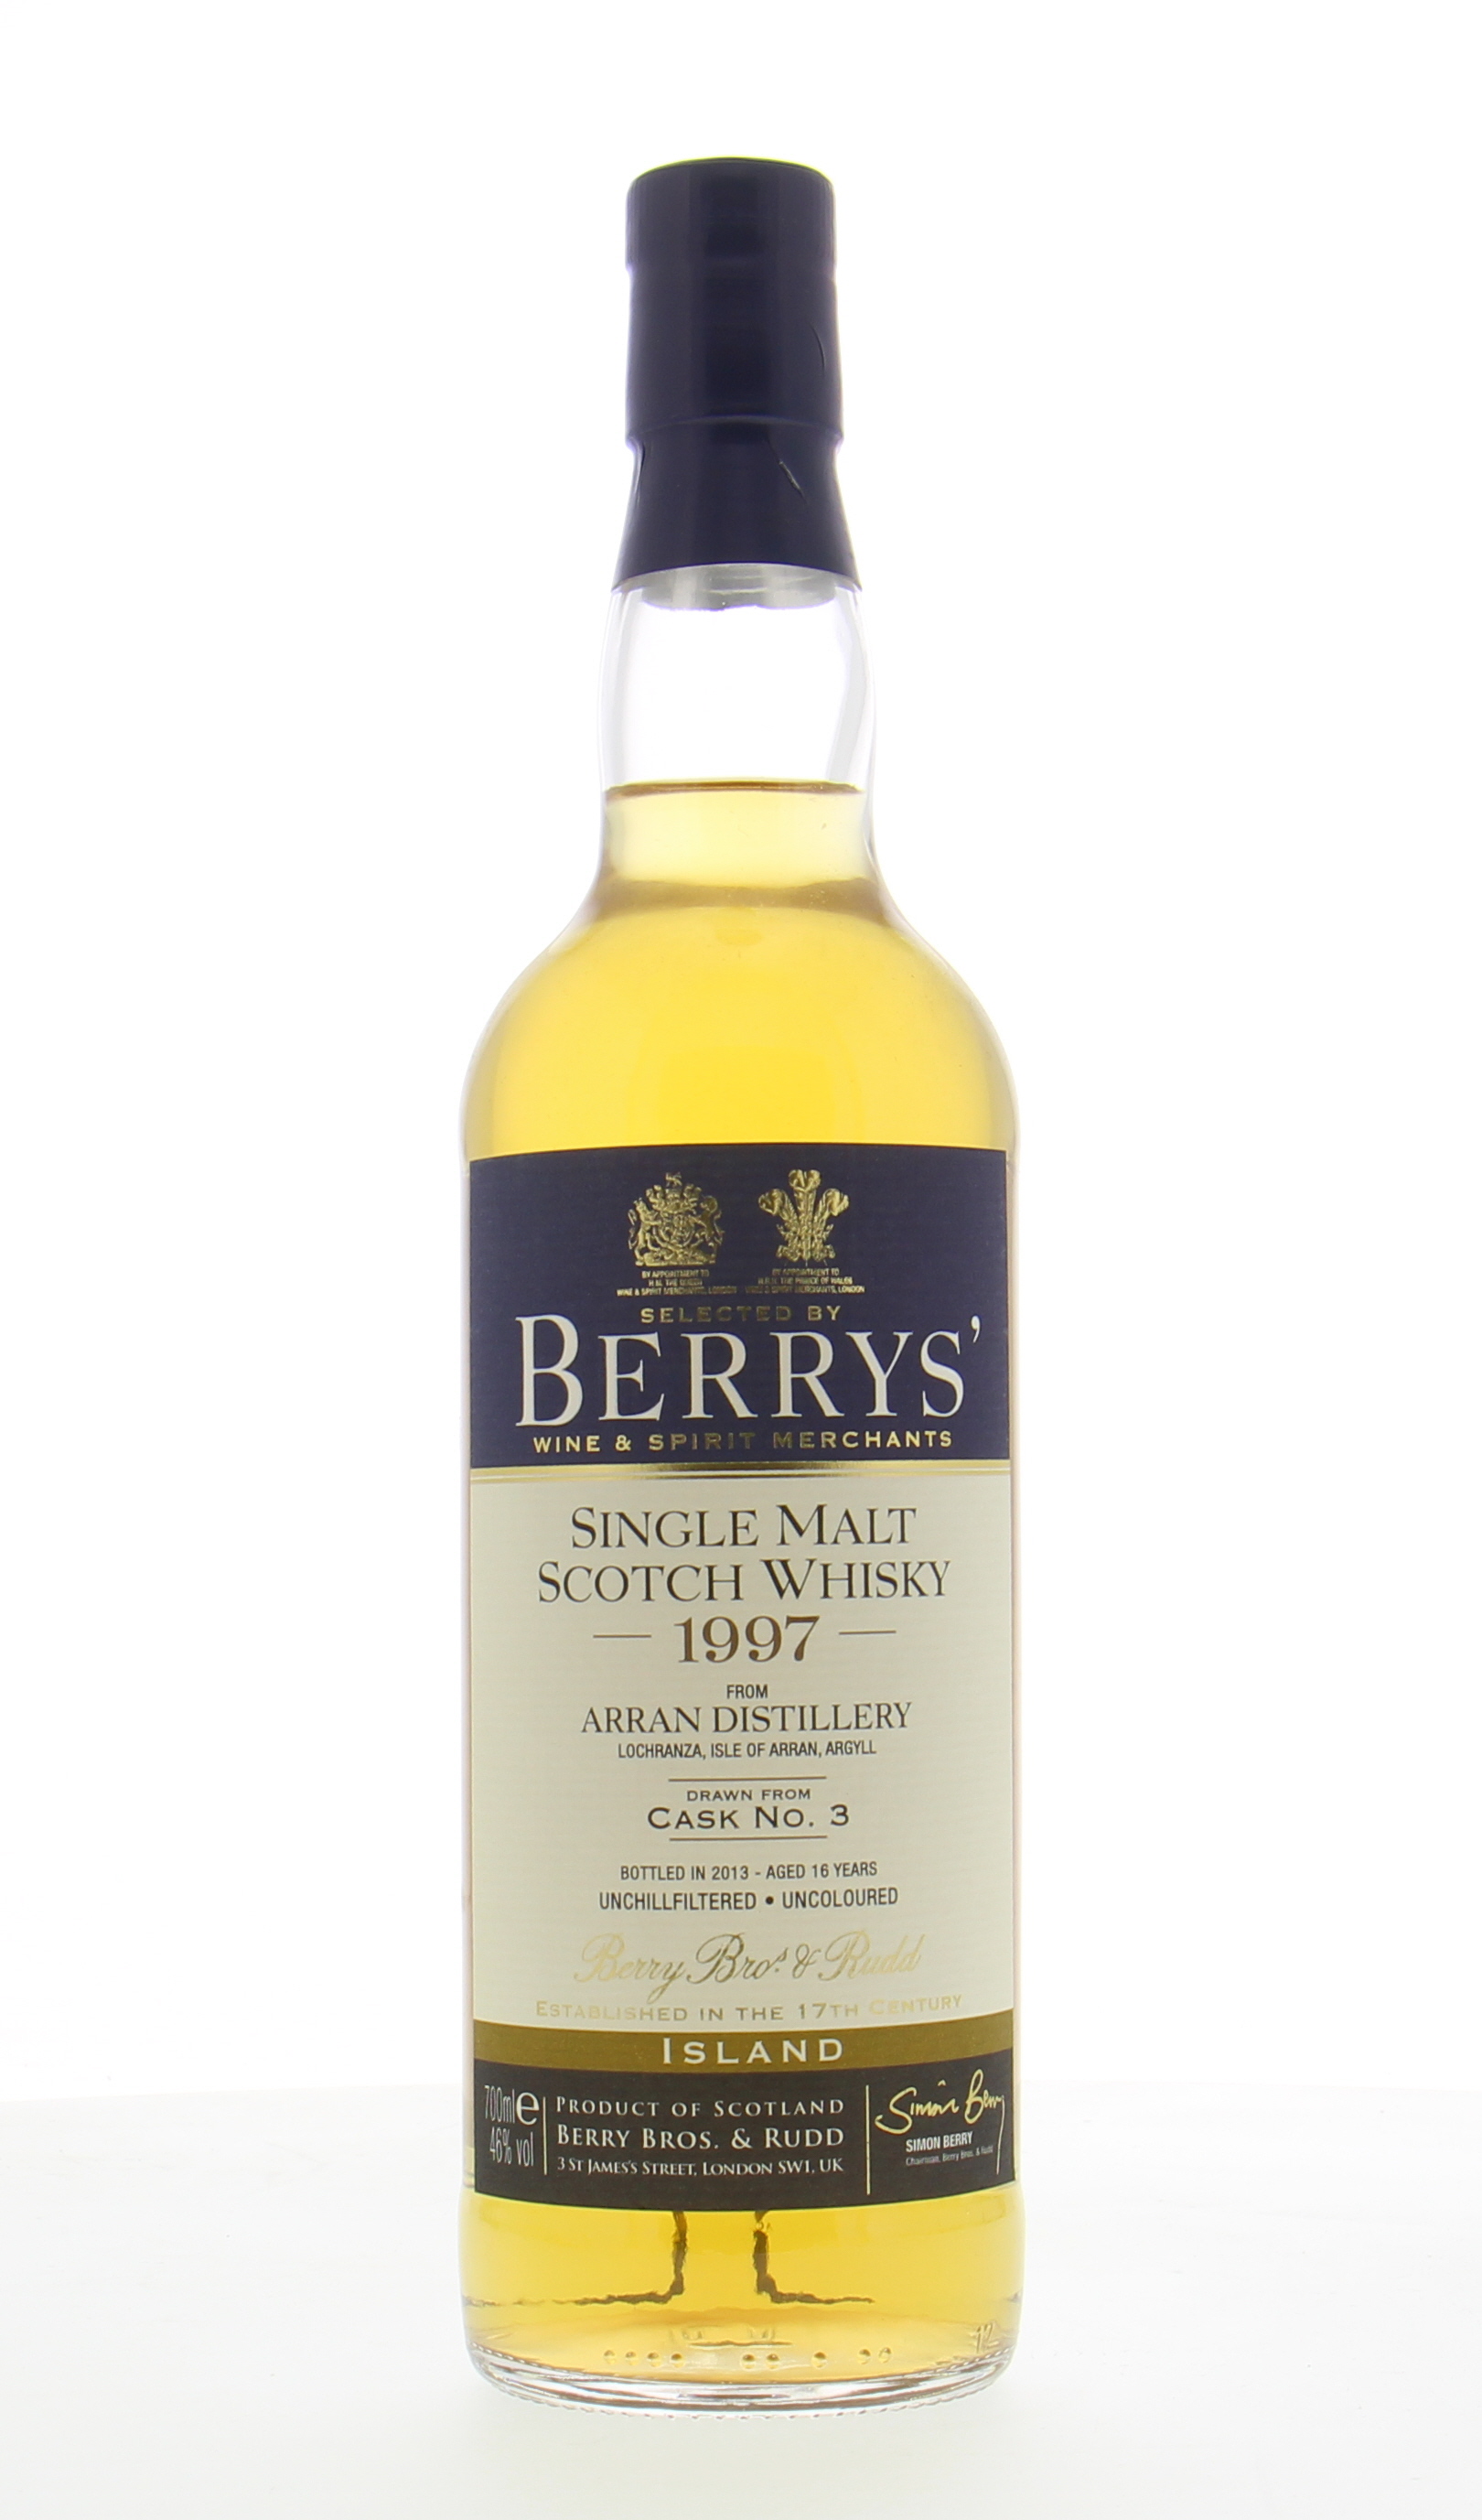 Arran - 16 Years Old Berry's Marsala Cask Finish Cask 3  46% 1997 Perfect